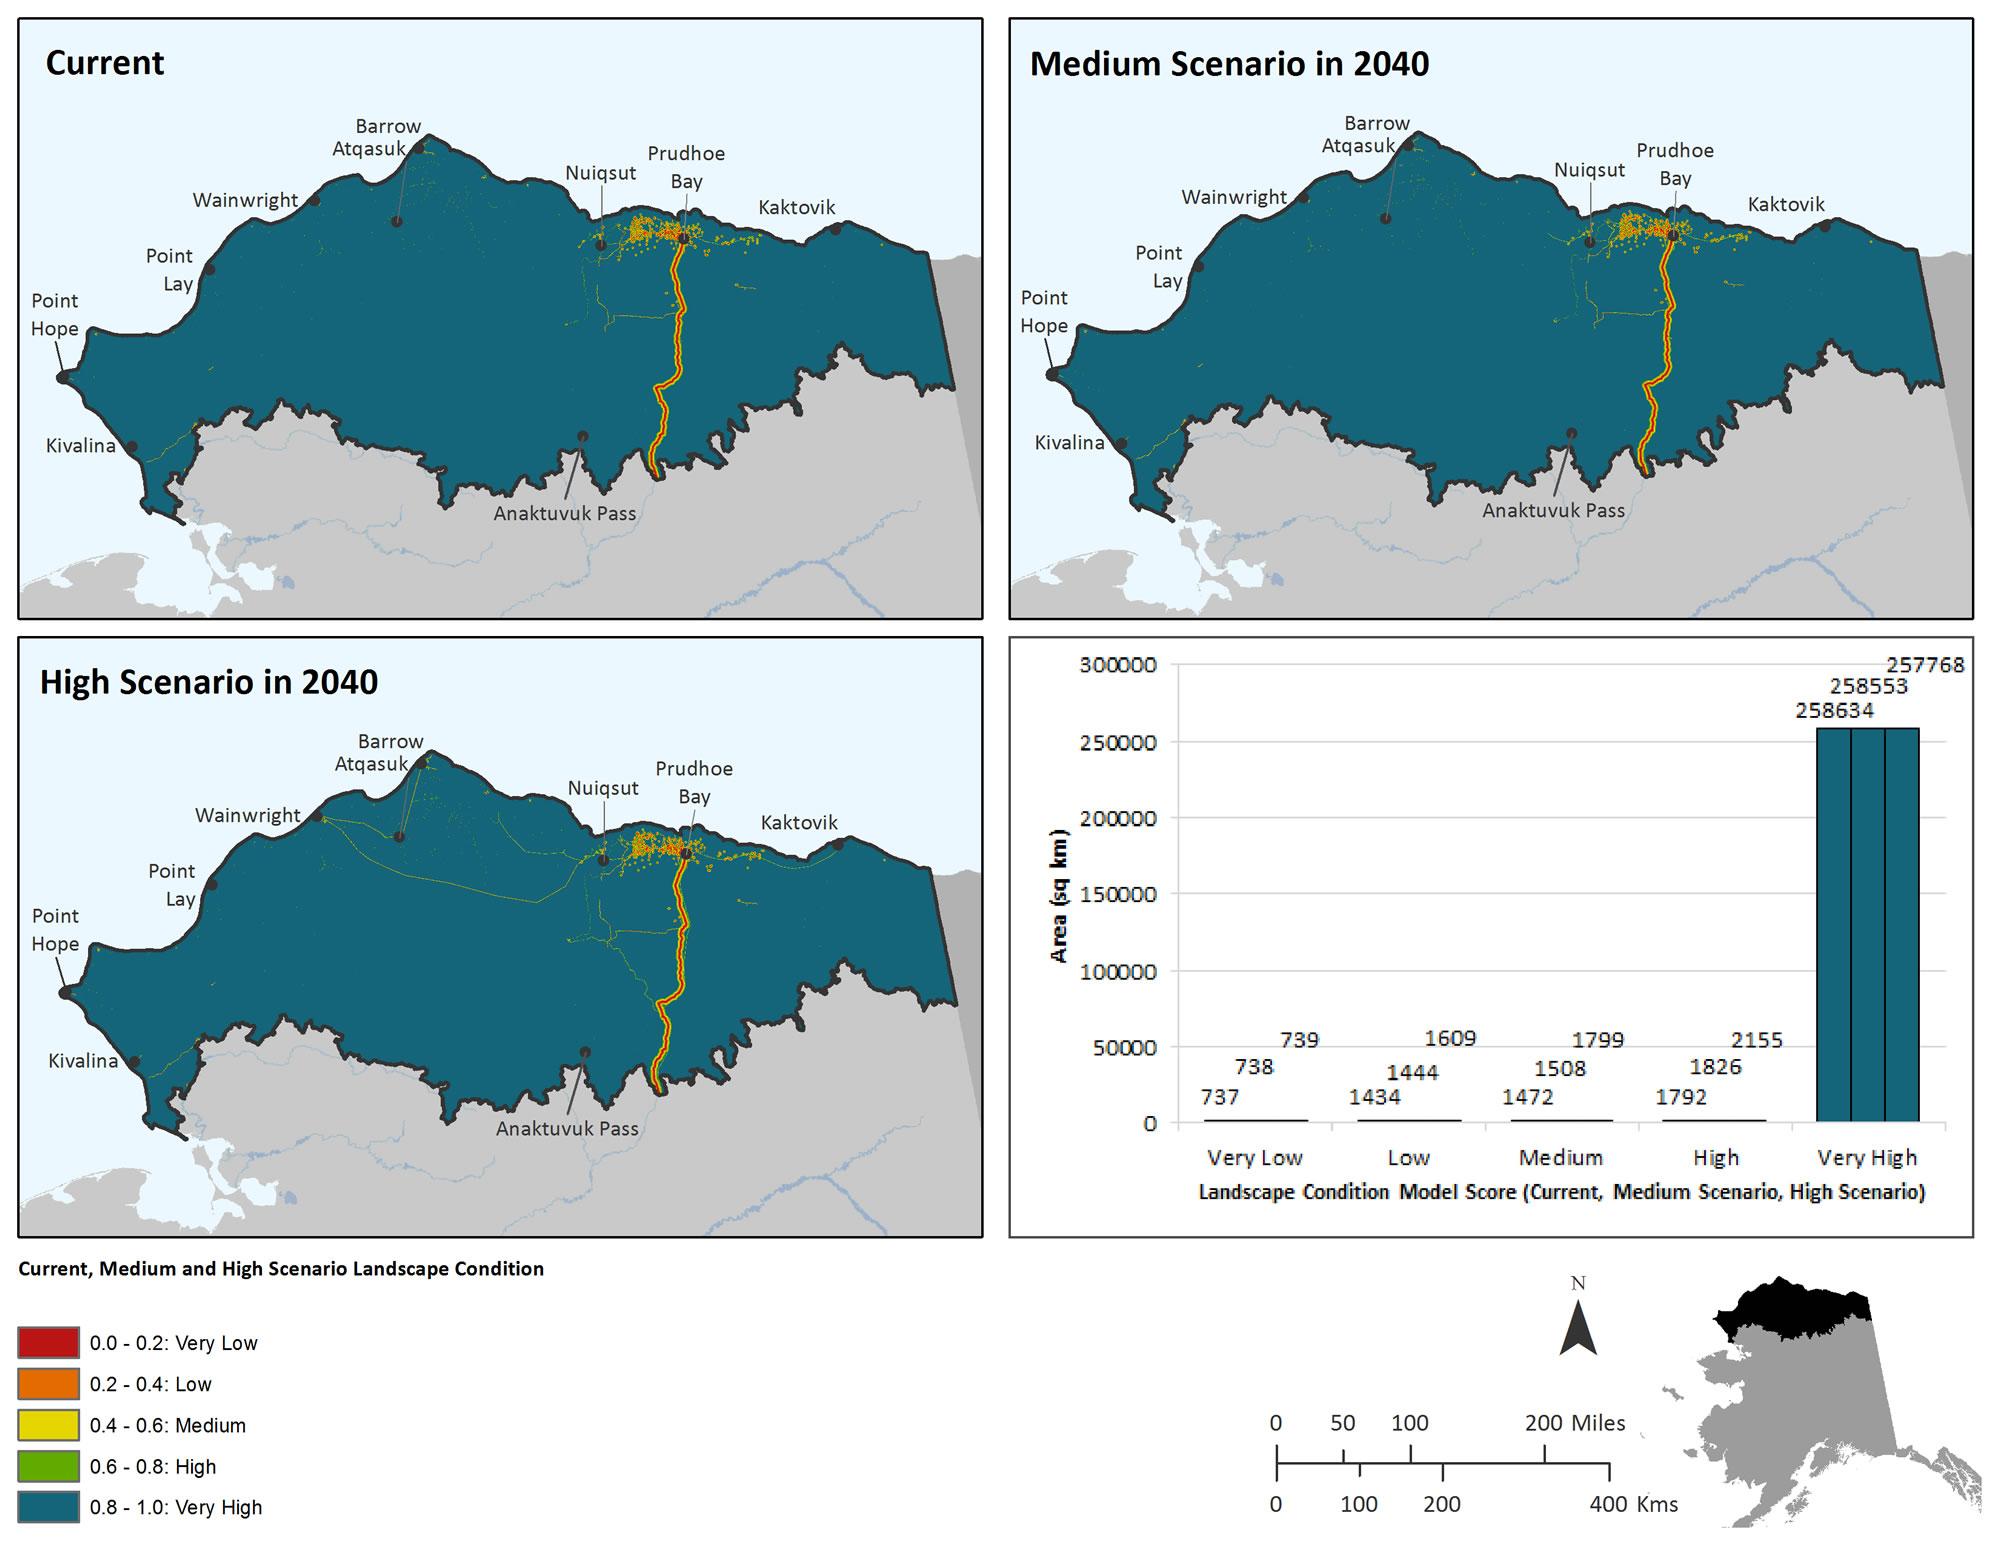 Current (2015), Medium (2040), and High Scenario (2040) landscape condition on the North Slope